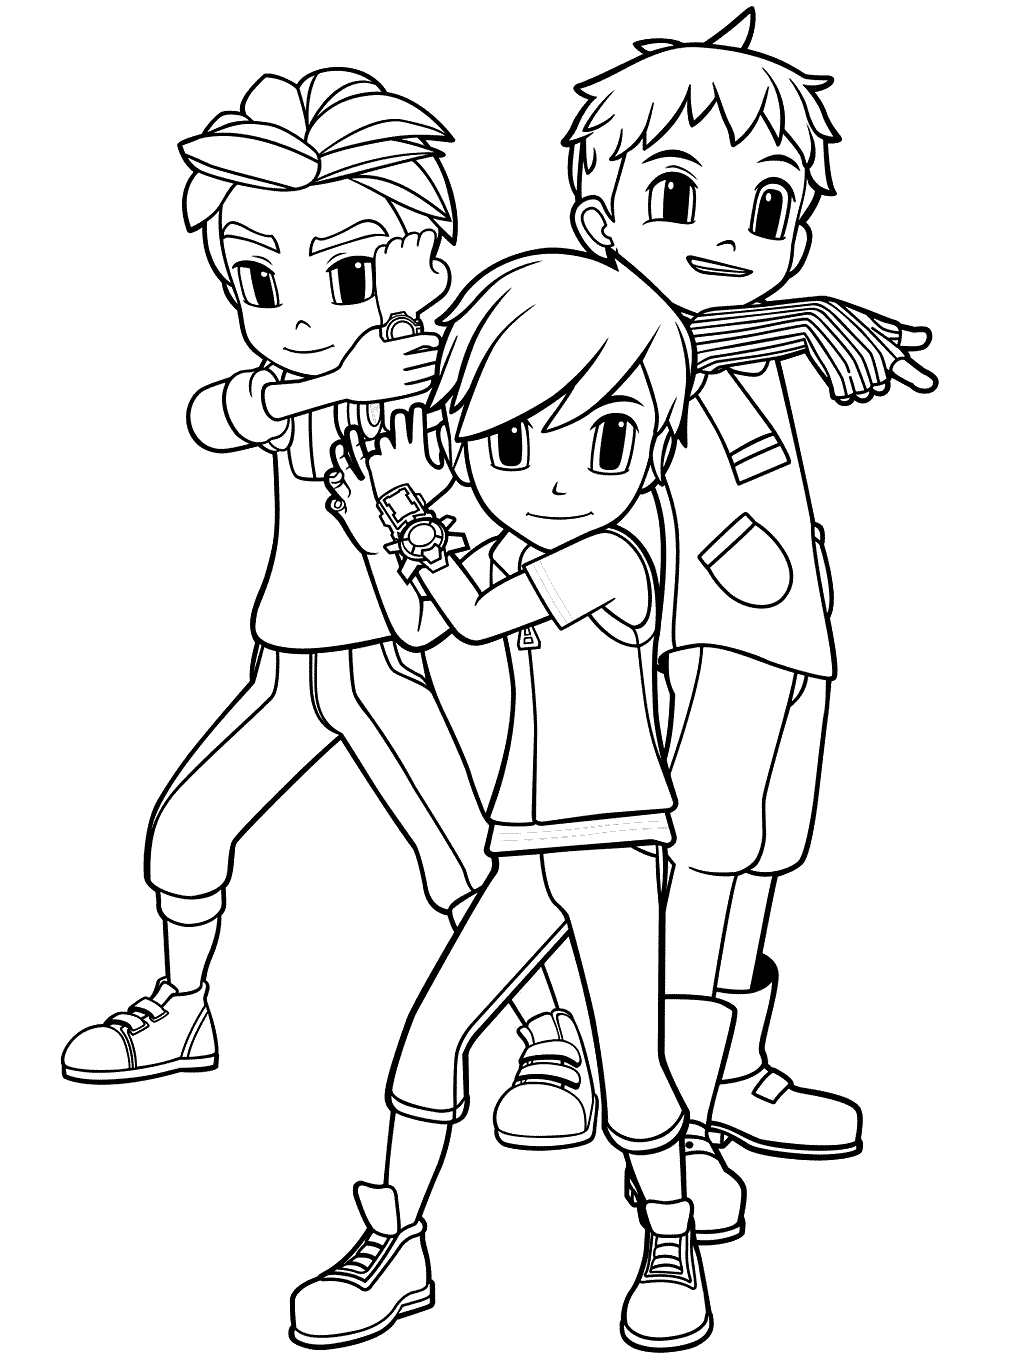 Dylan with Ryan and Kory Coloring Page